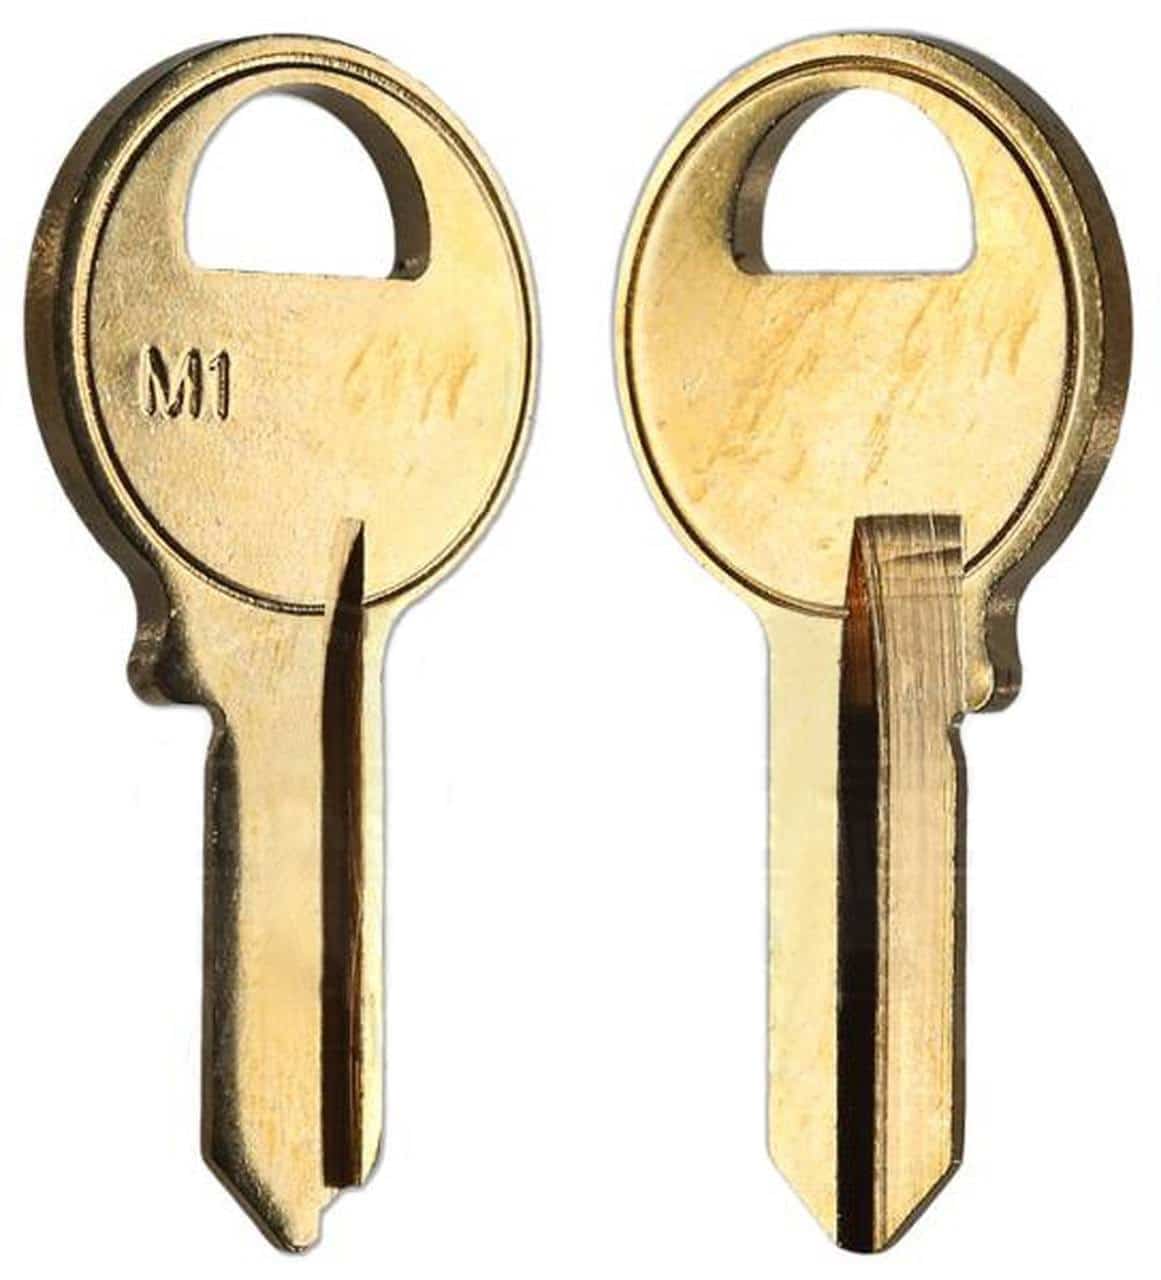 M1-BR key blank for mail box